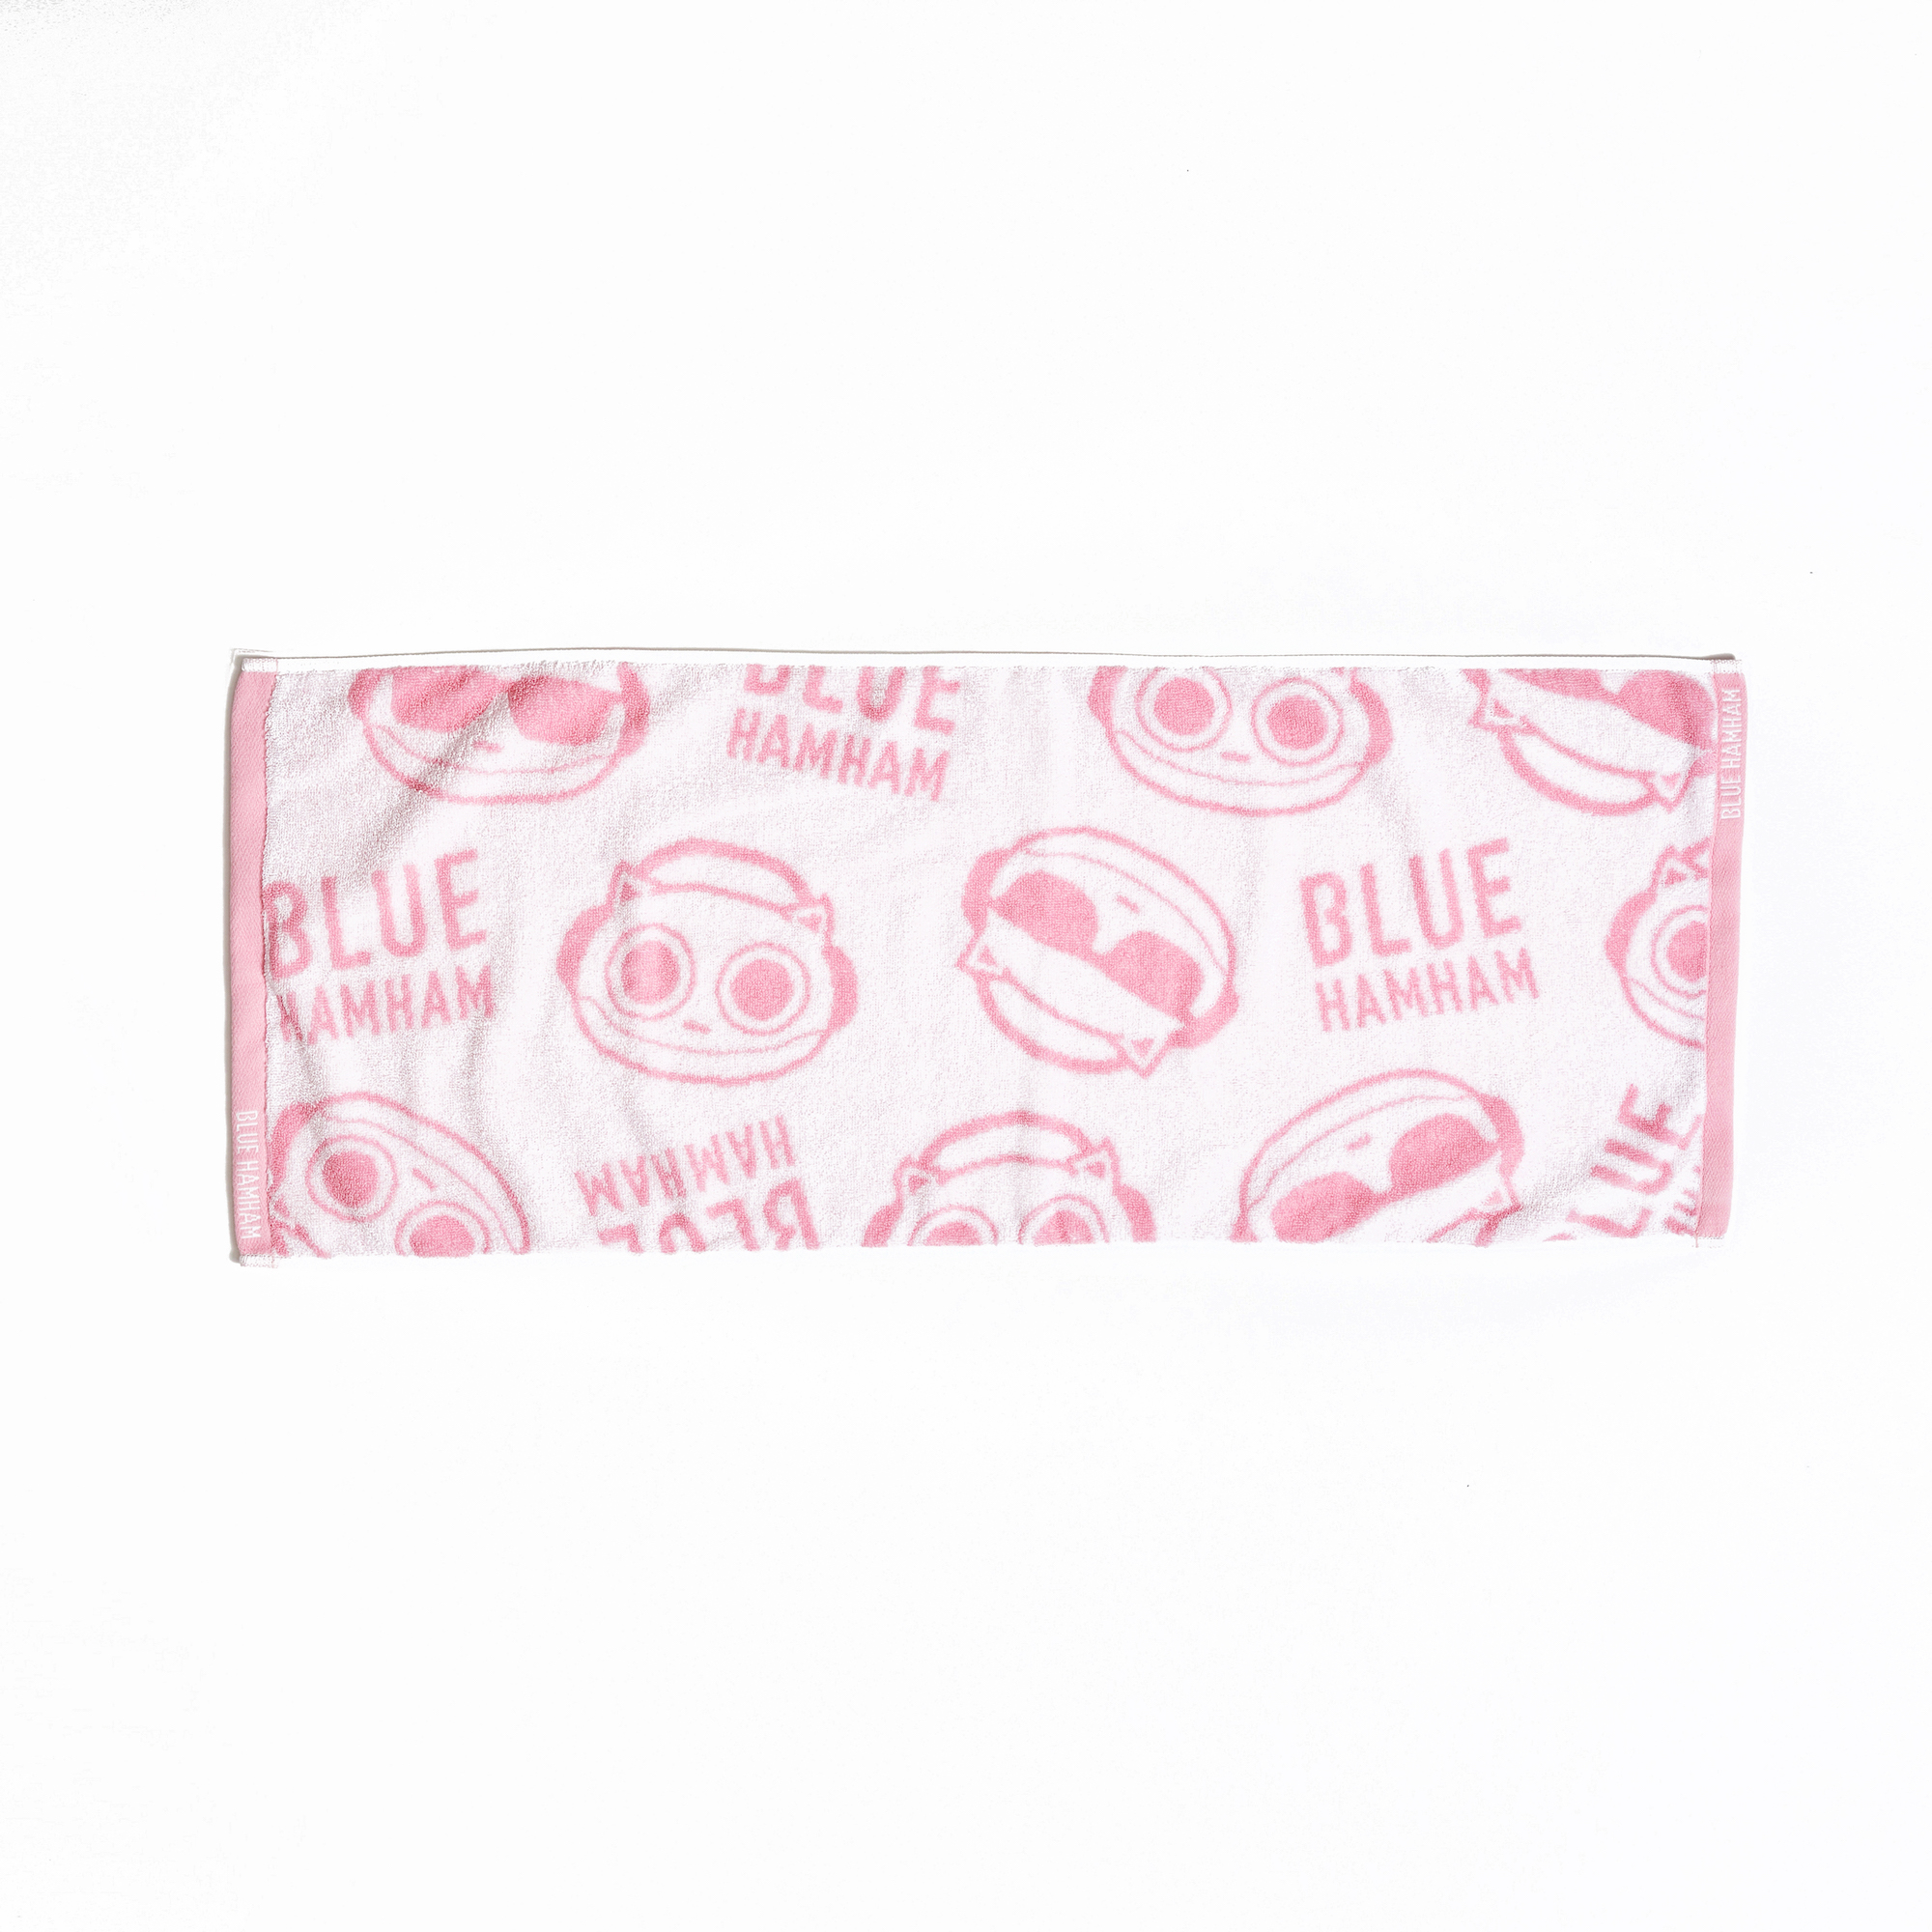 blue-hamham-pop-up-store-pink-collection-8-2